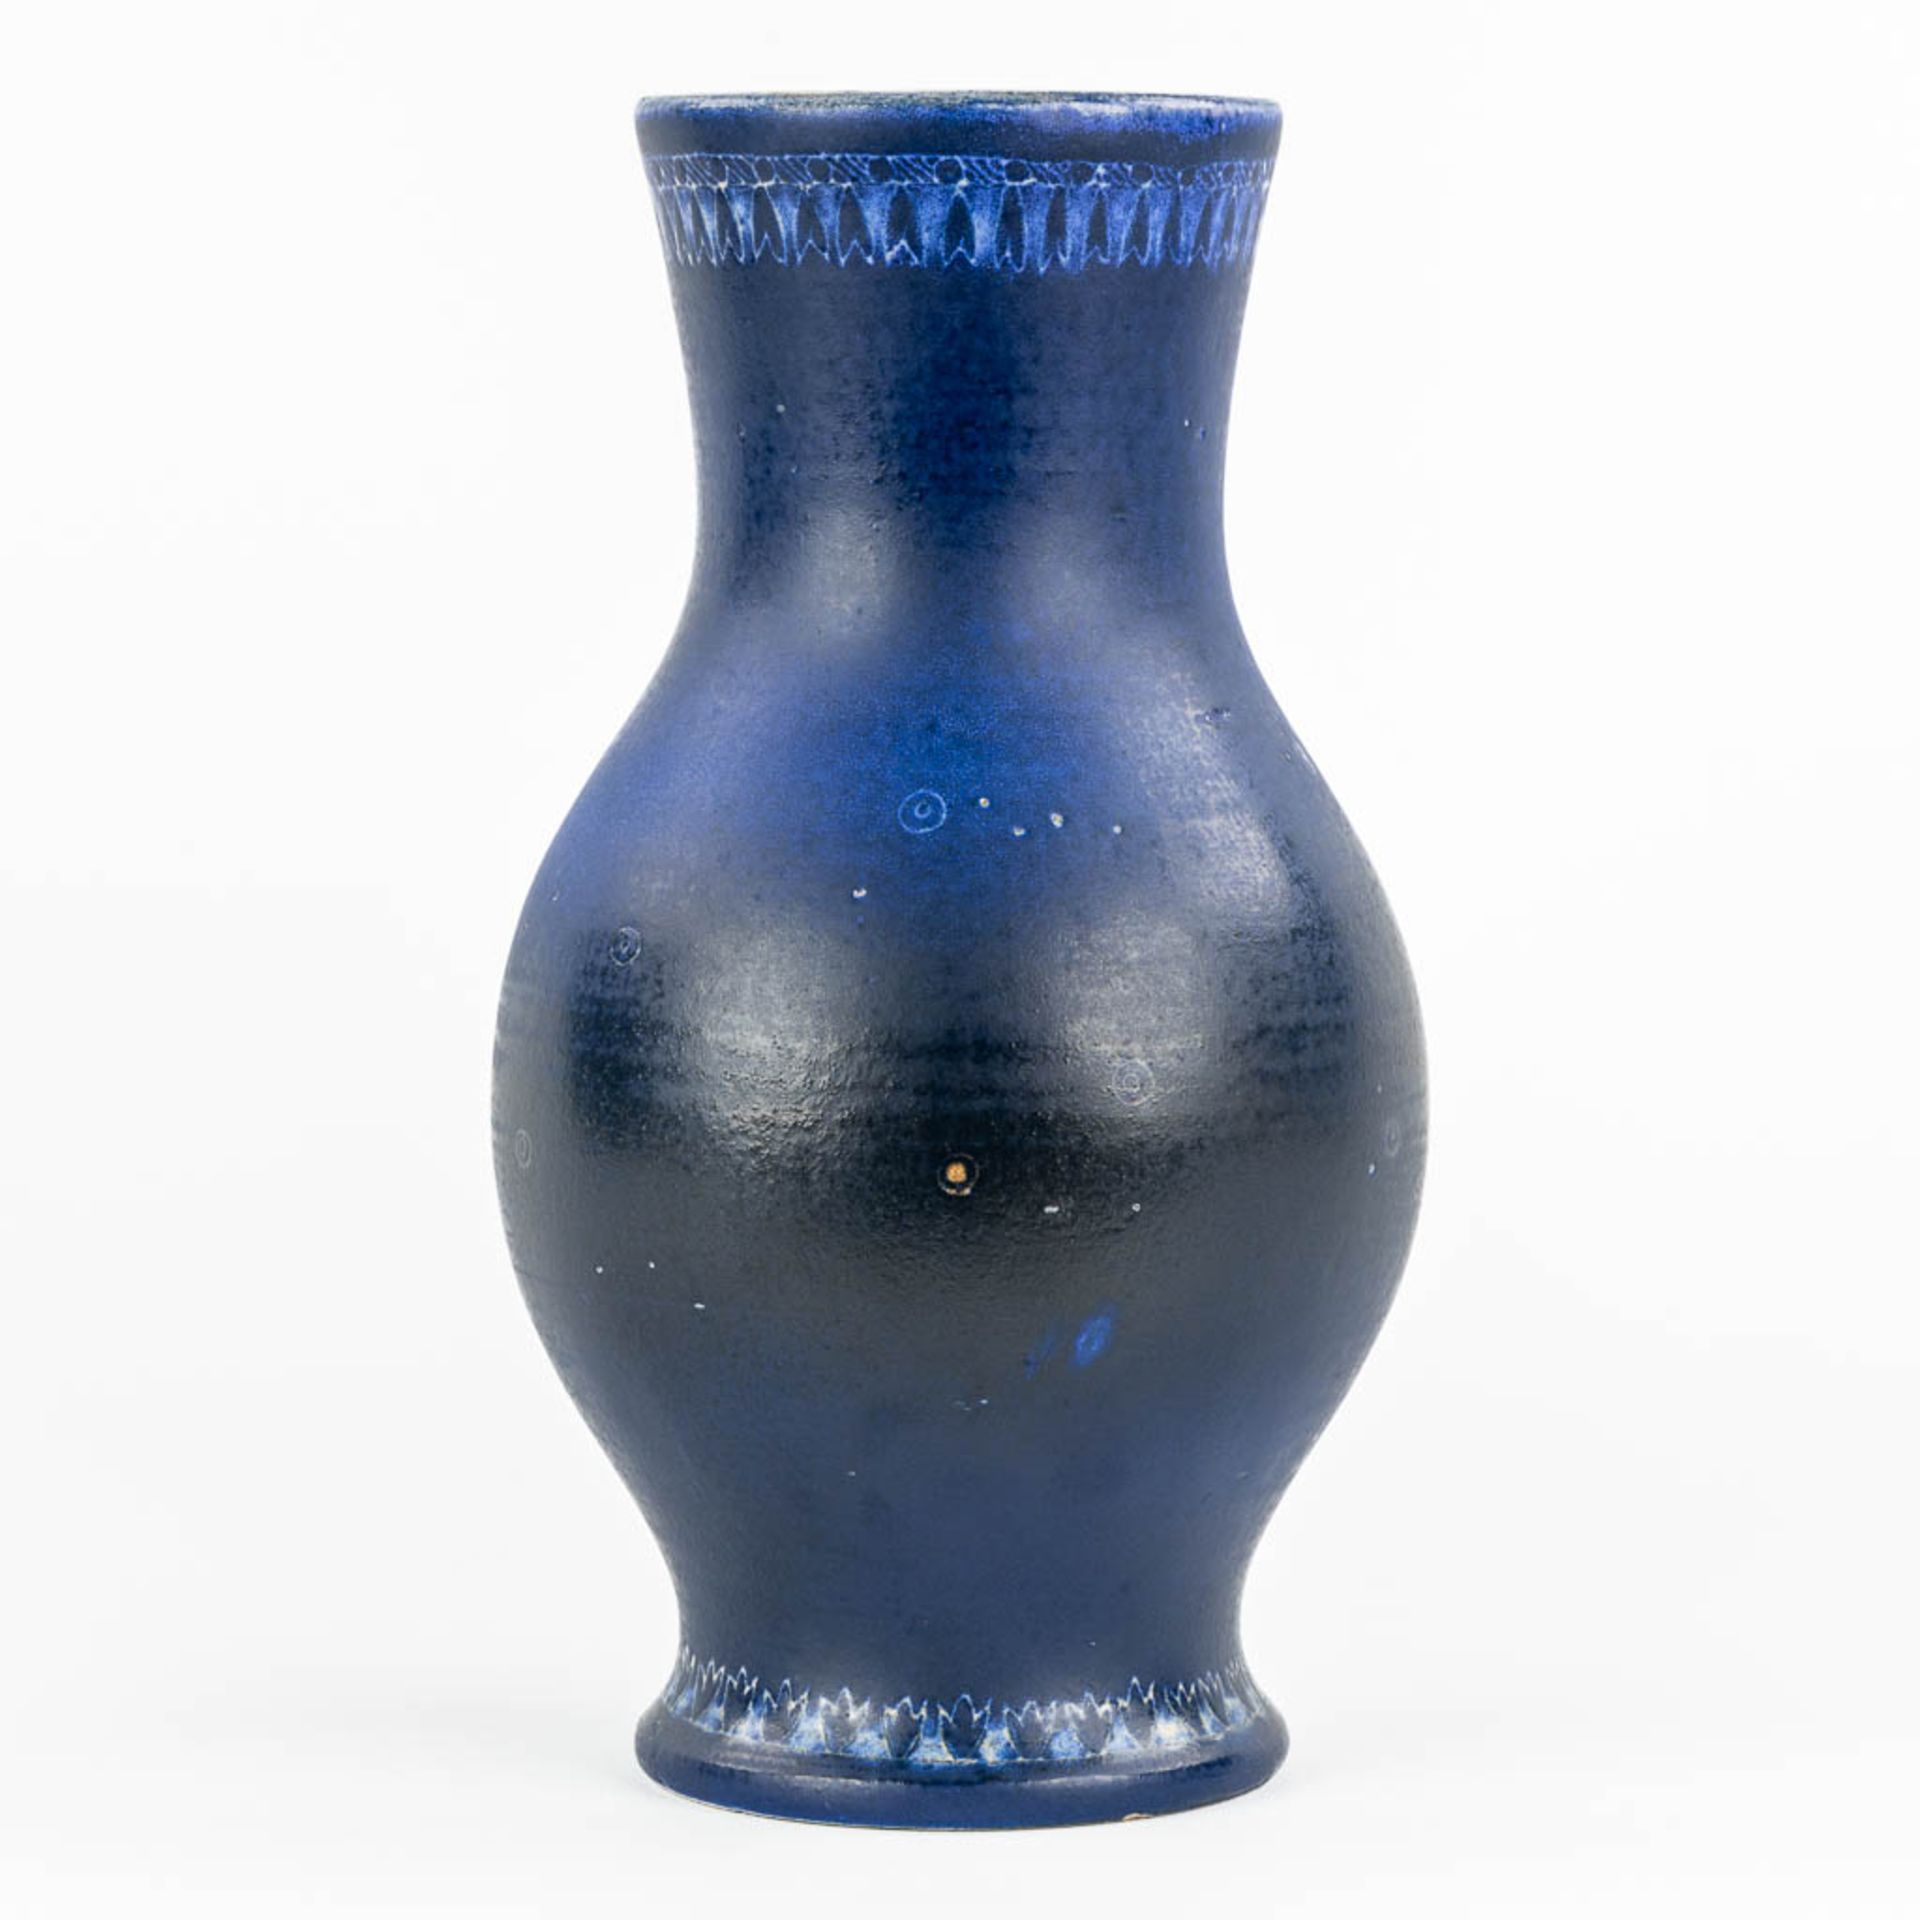 A vase with blue glaze, glazed ceramics for Perignem. From the early periods. (H:31,5 x D:18 cm) - Image 4 of 11